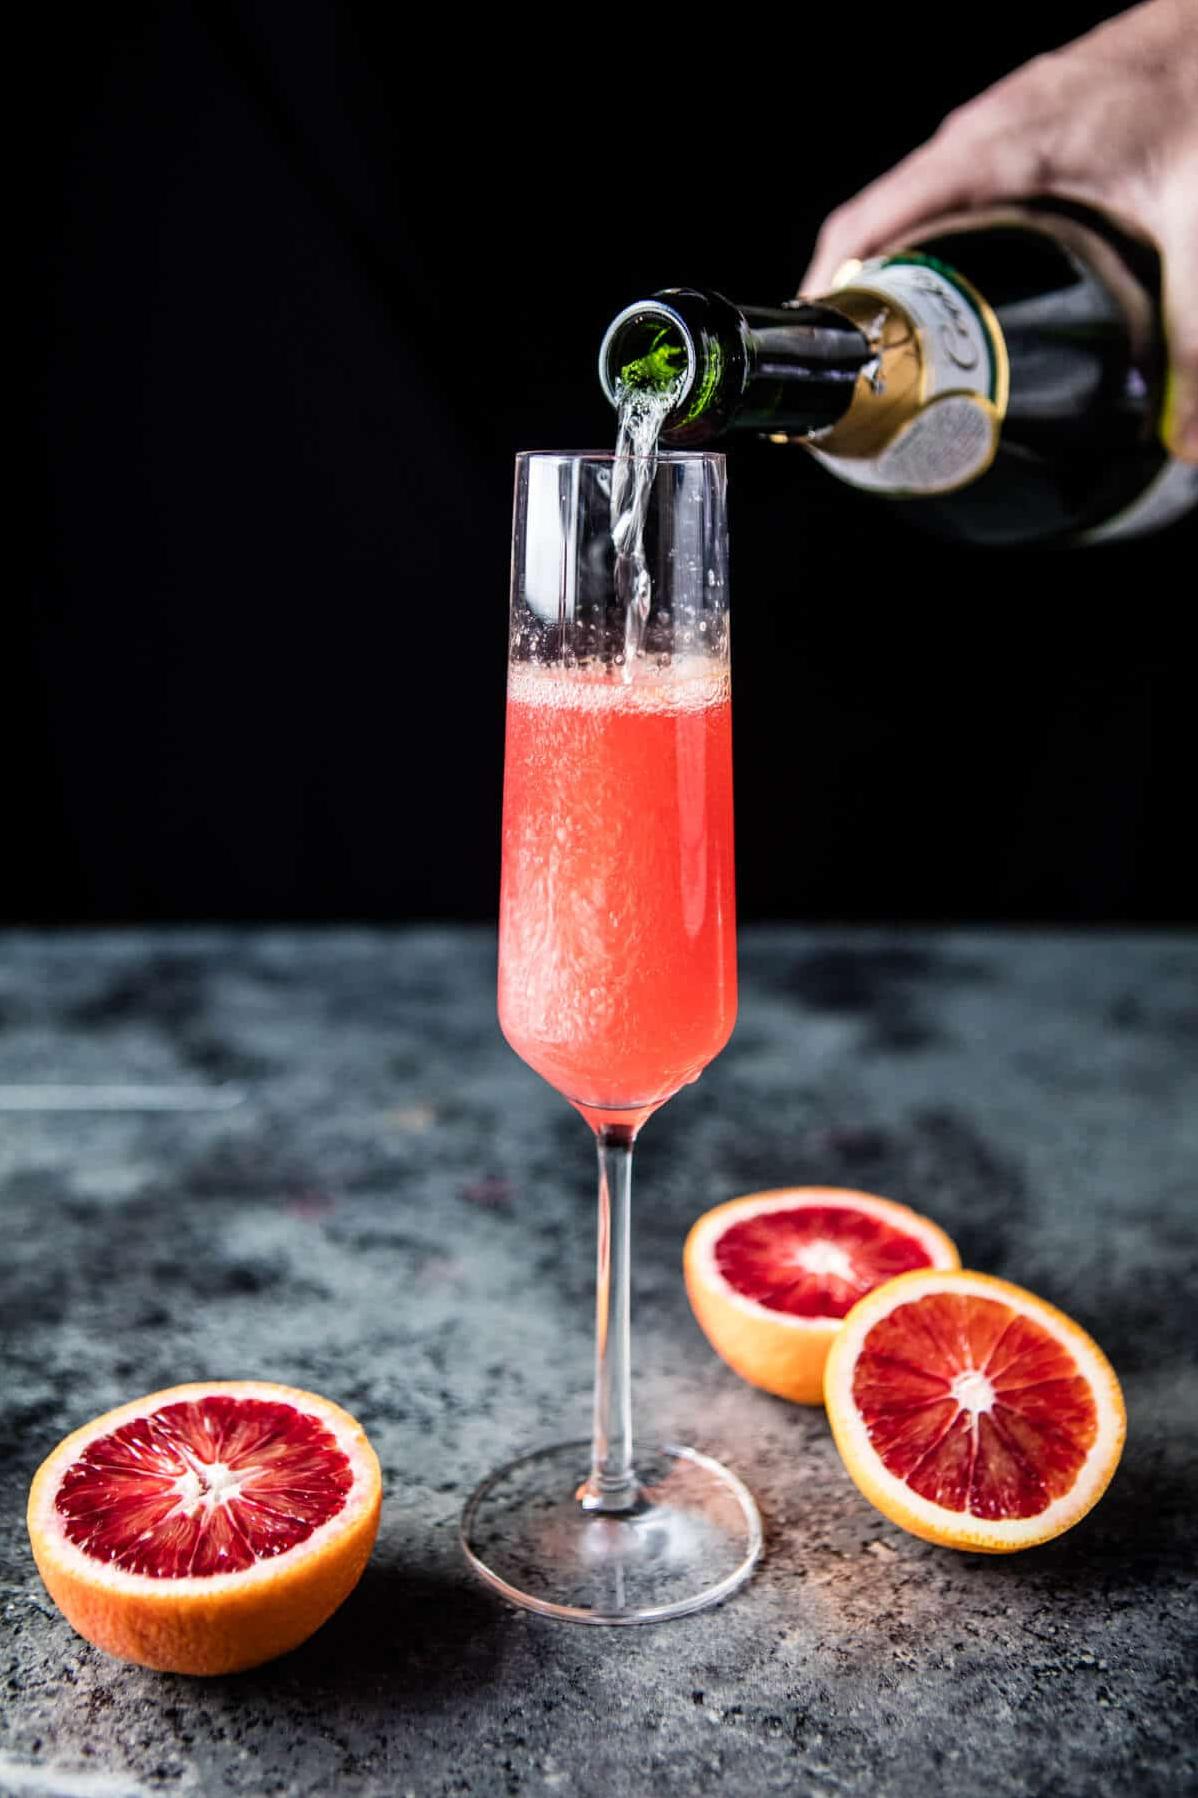  The bubbly texture of the champagne compliments the sweetness of the blood orange juice.